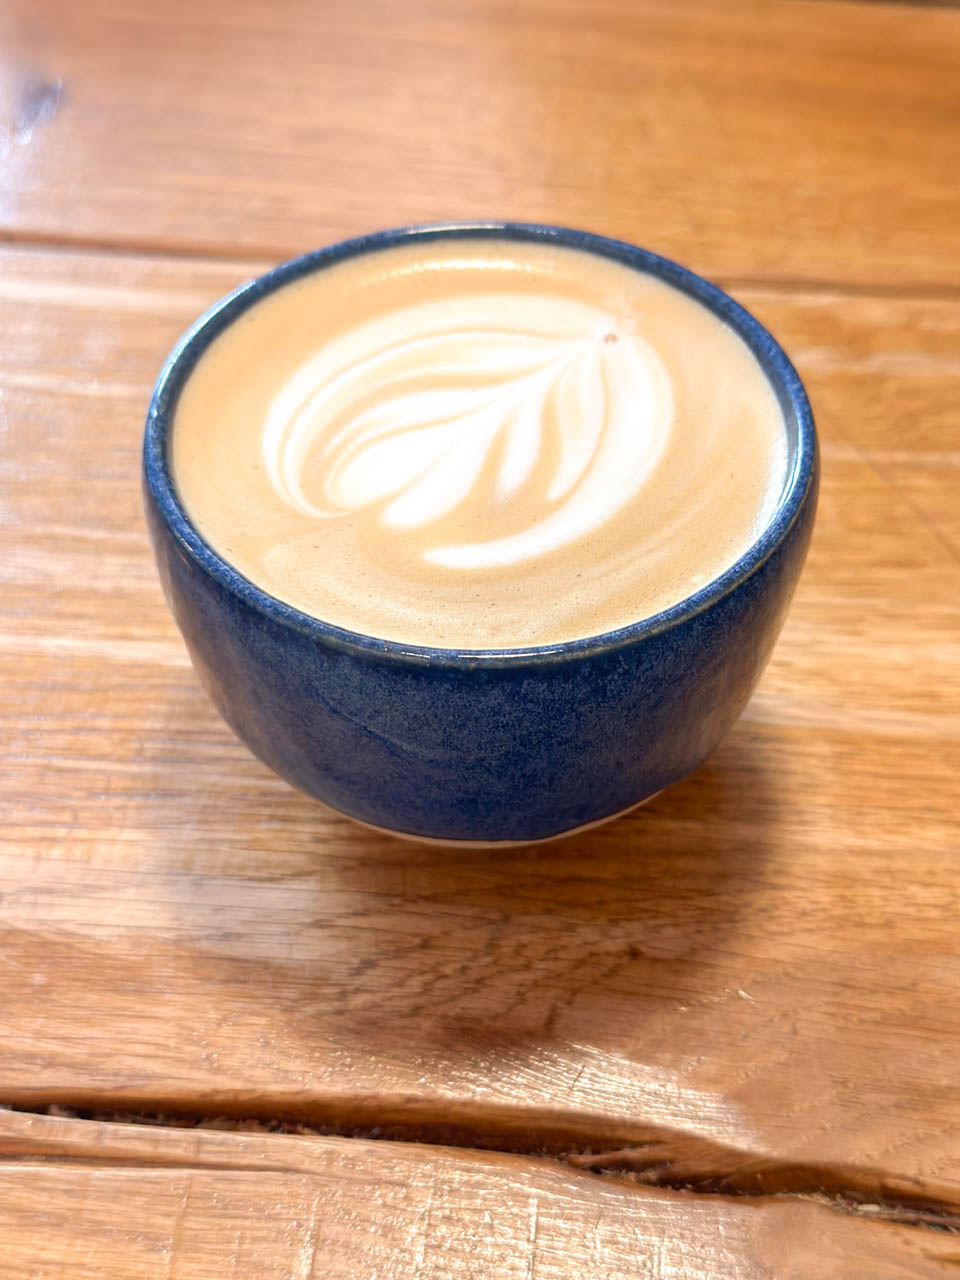 Close-up of a steaming latte with leaf latte art in a blue ceramic mug, placed on a textured wooden table